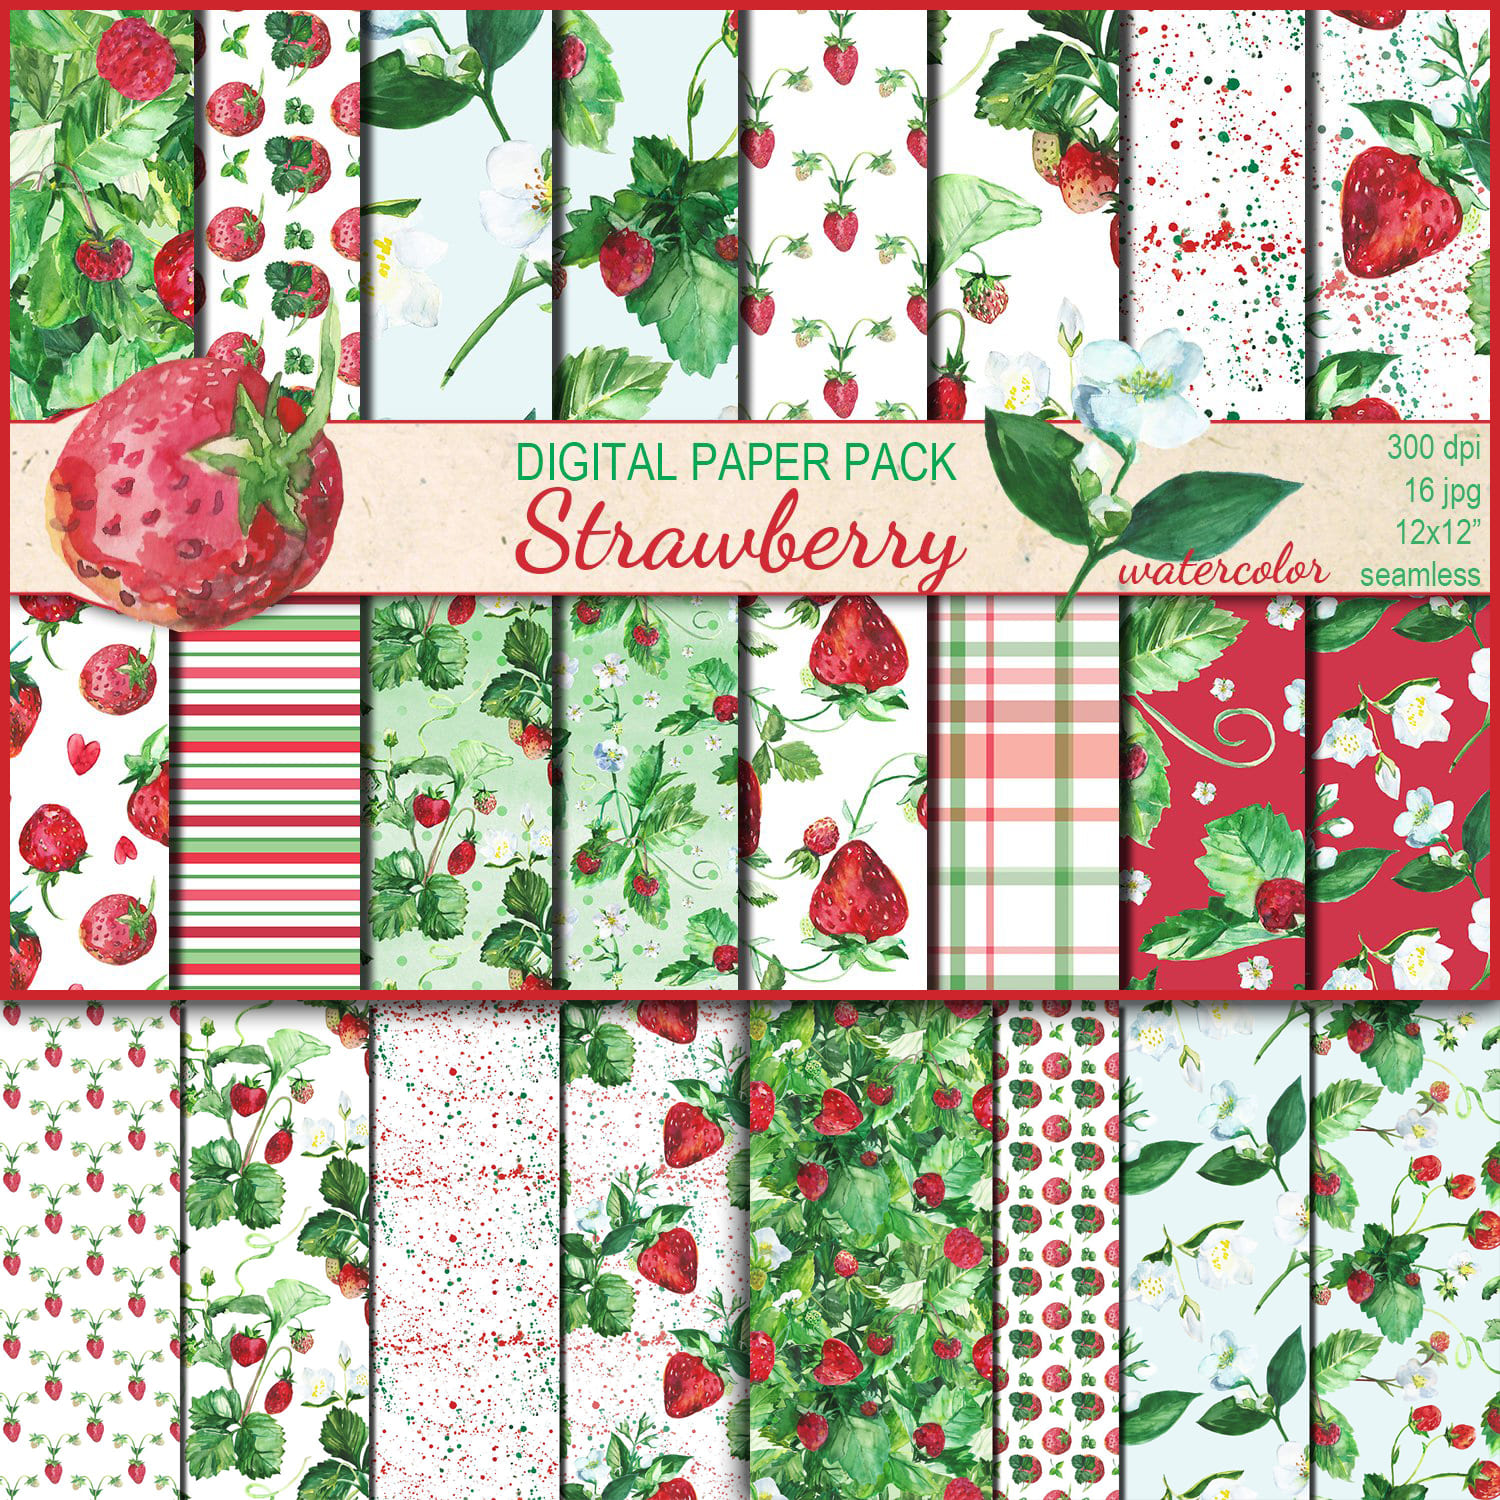 Watercolor strawberries in different combinations on patterns.